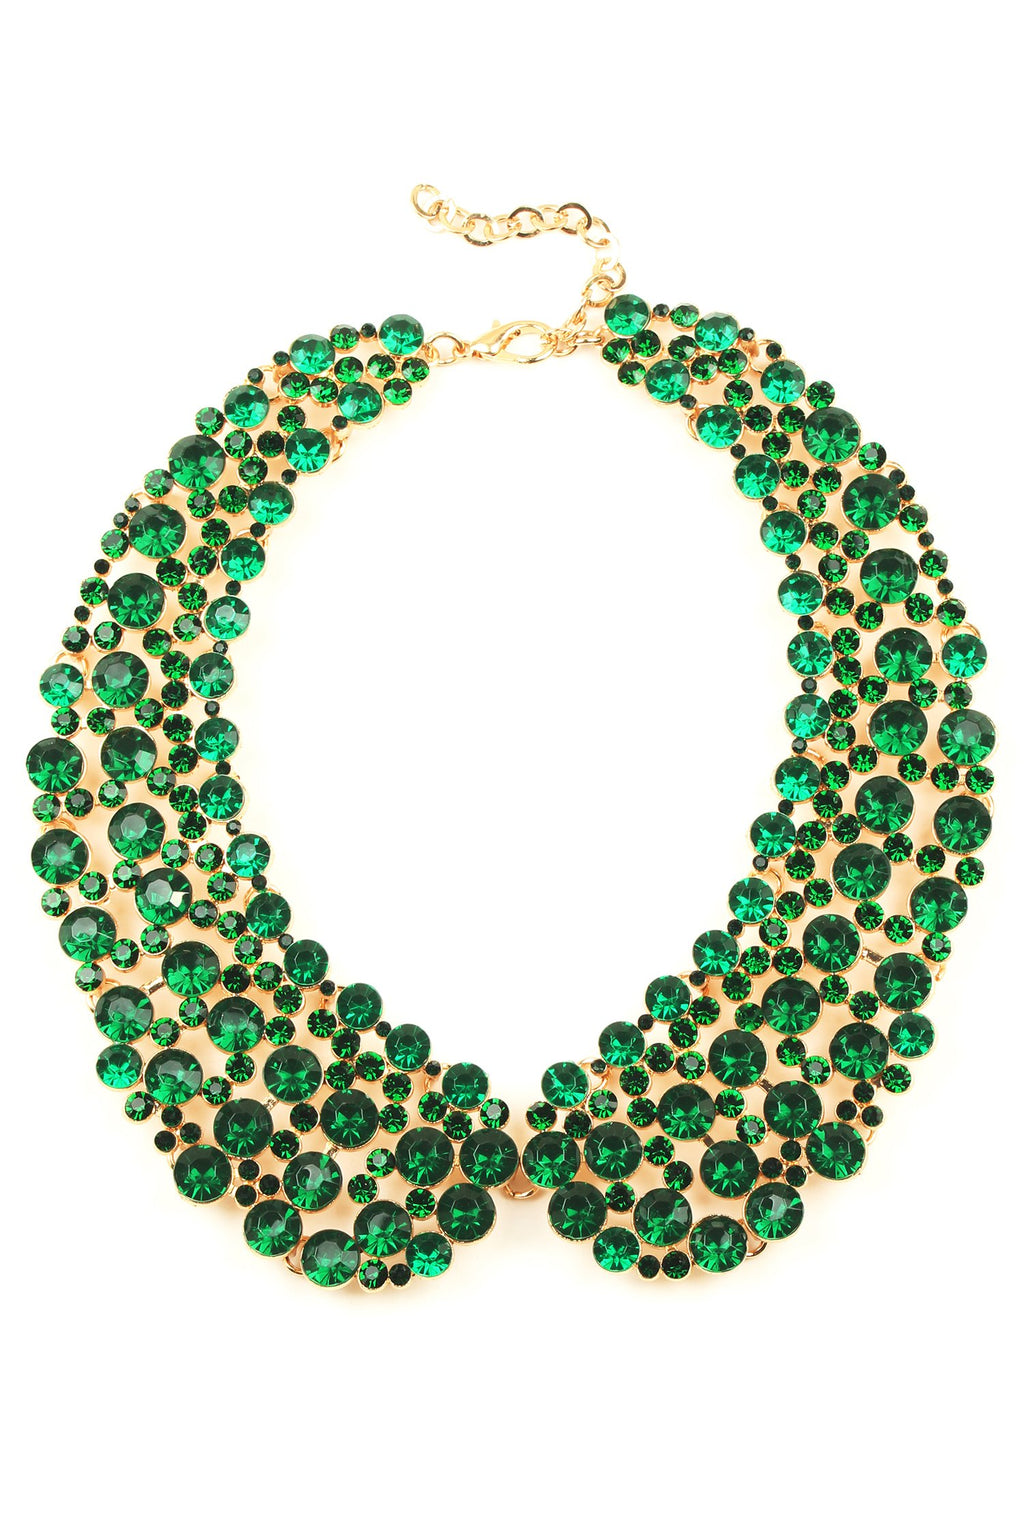 12 inch gold collar necklace with circular green crystals arranged in collar pattern.